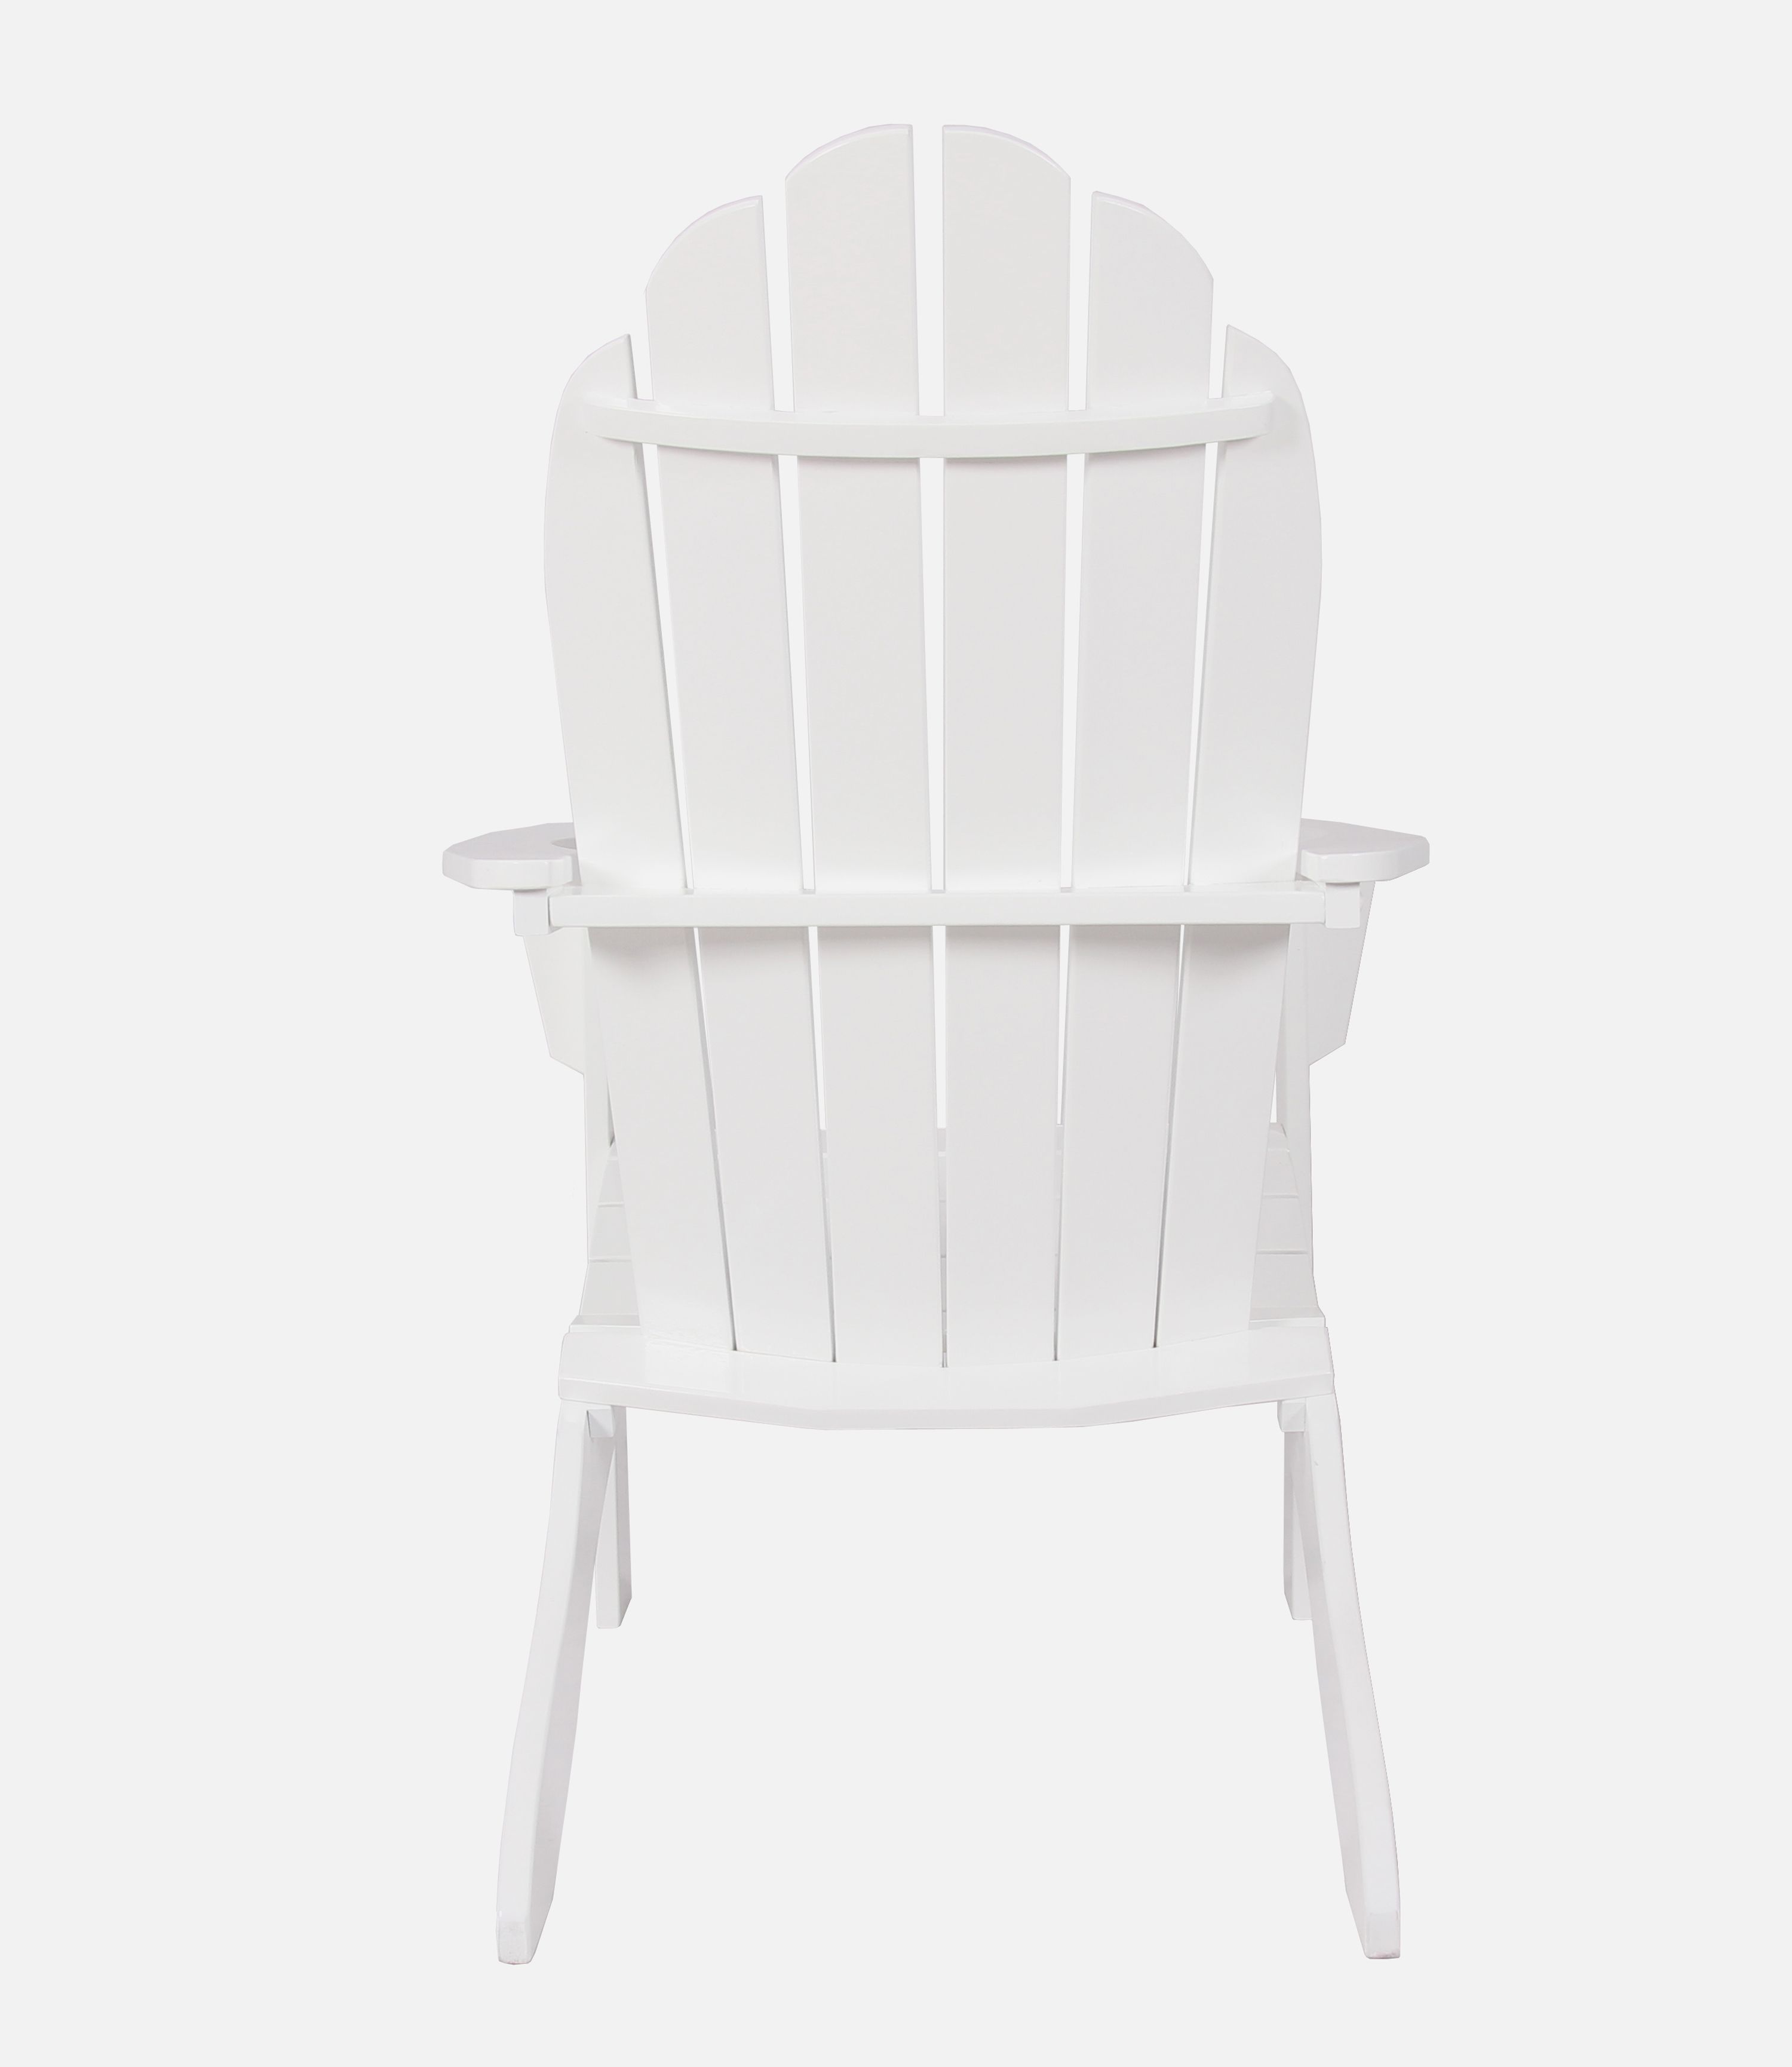 Mainstays Weather Resistant Rubberwood Adirondack Chair - White - image 4 of 9